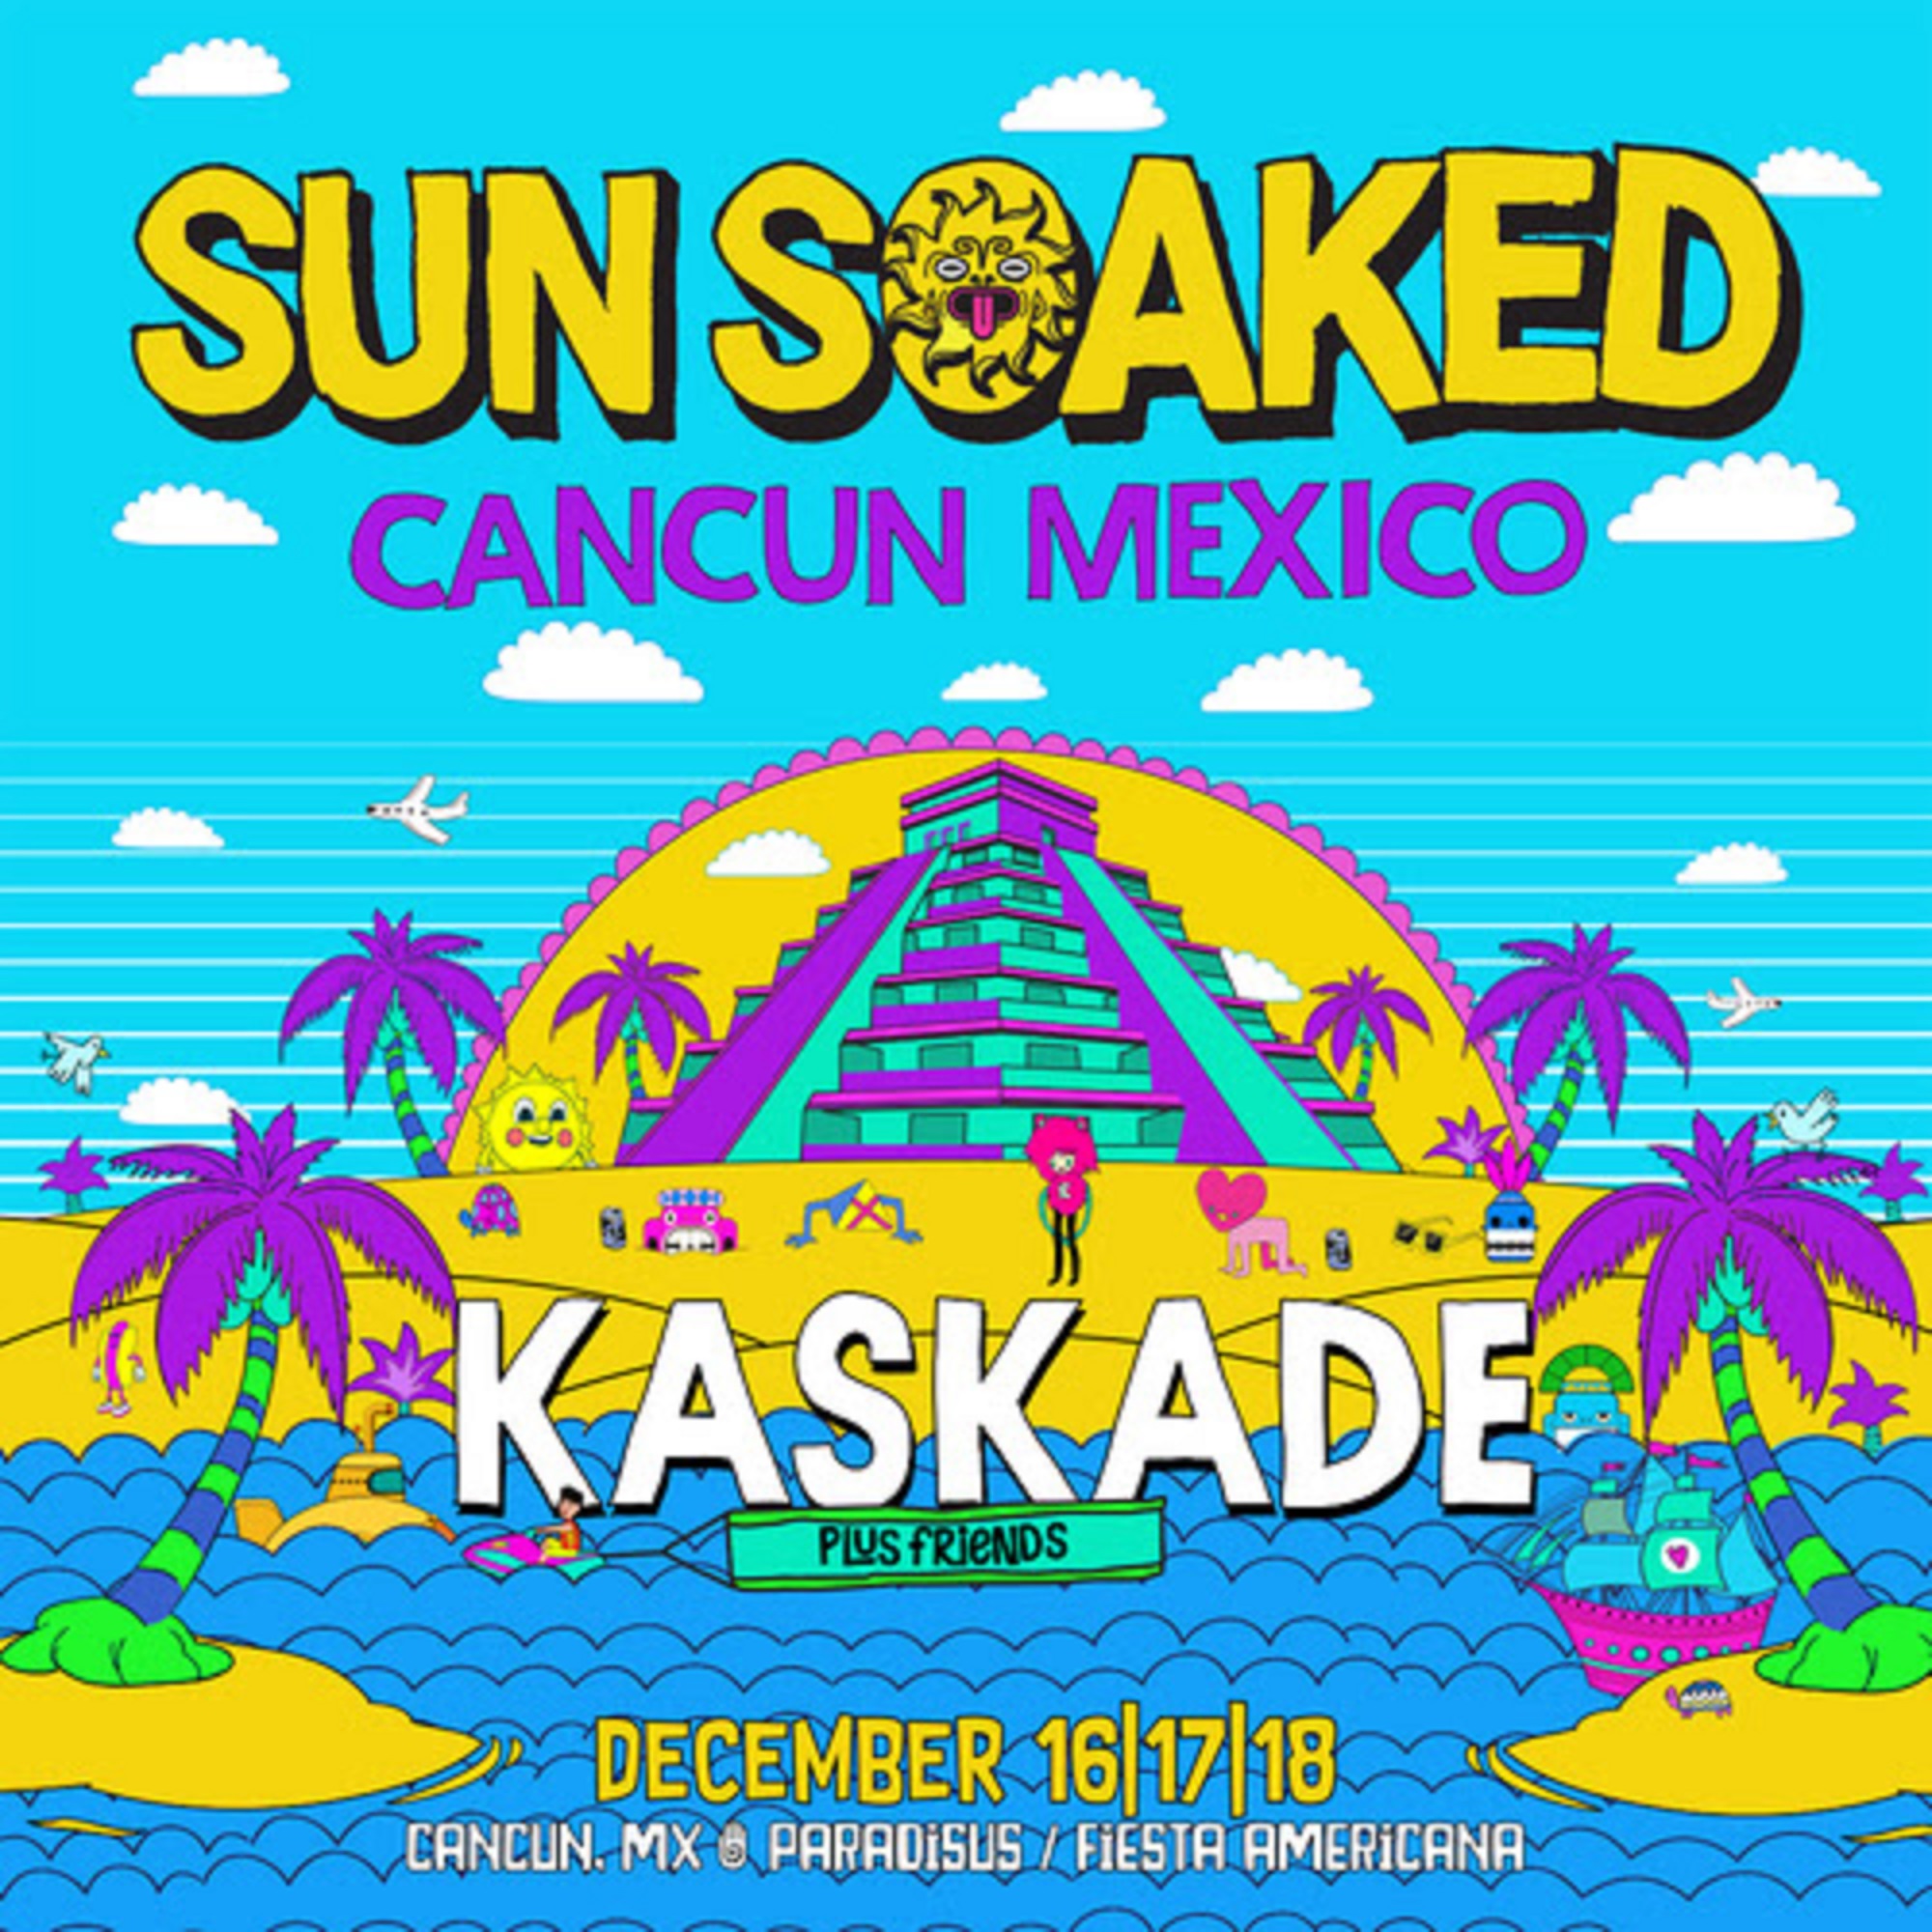 Kaskade and Festication announce the debut of Kaskade’s Destination Festival Sun Soaked in Cancún, Mexico